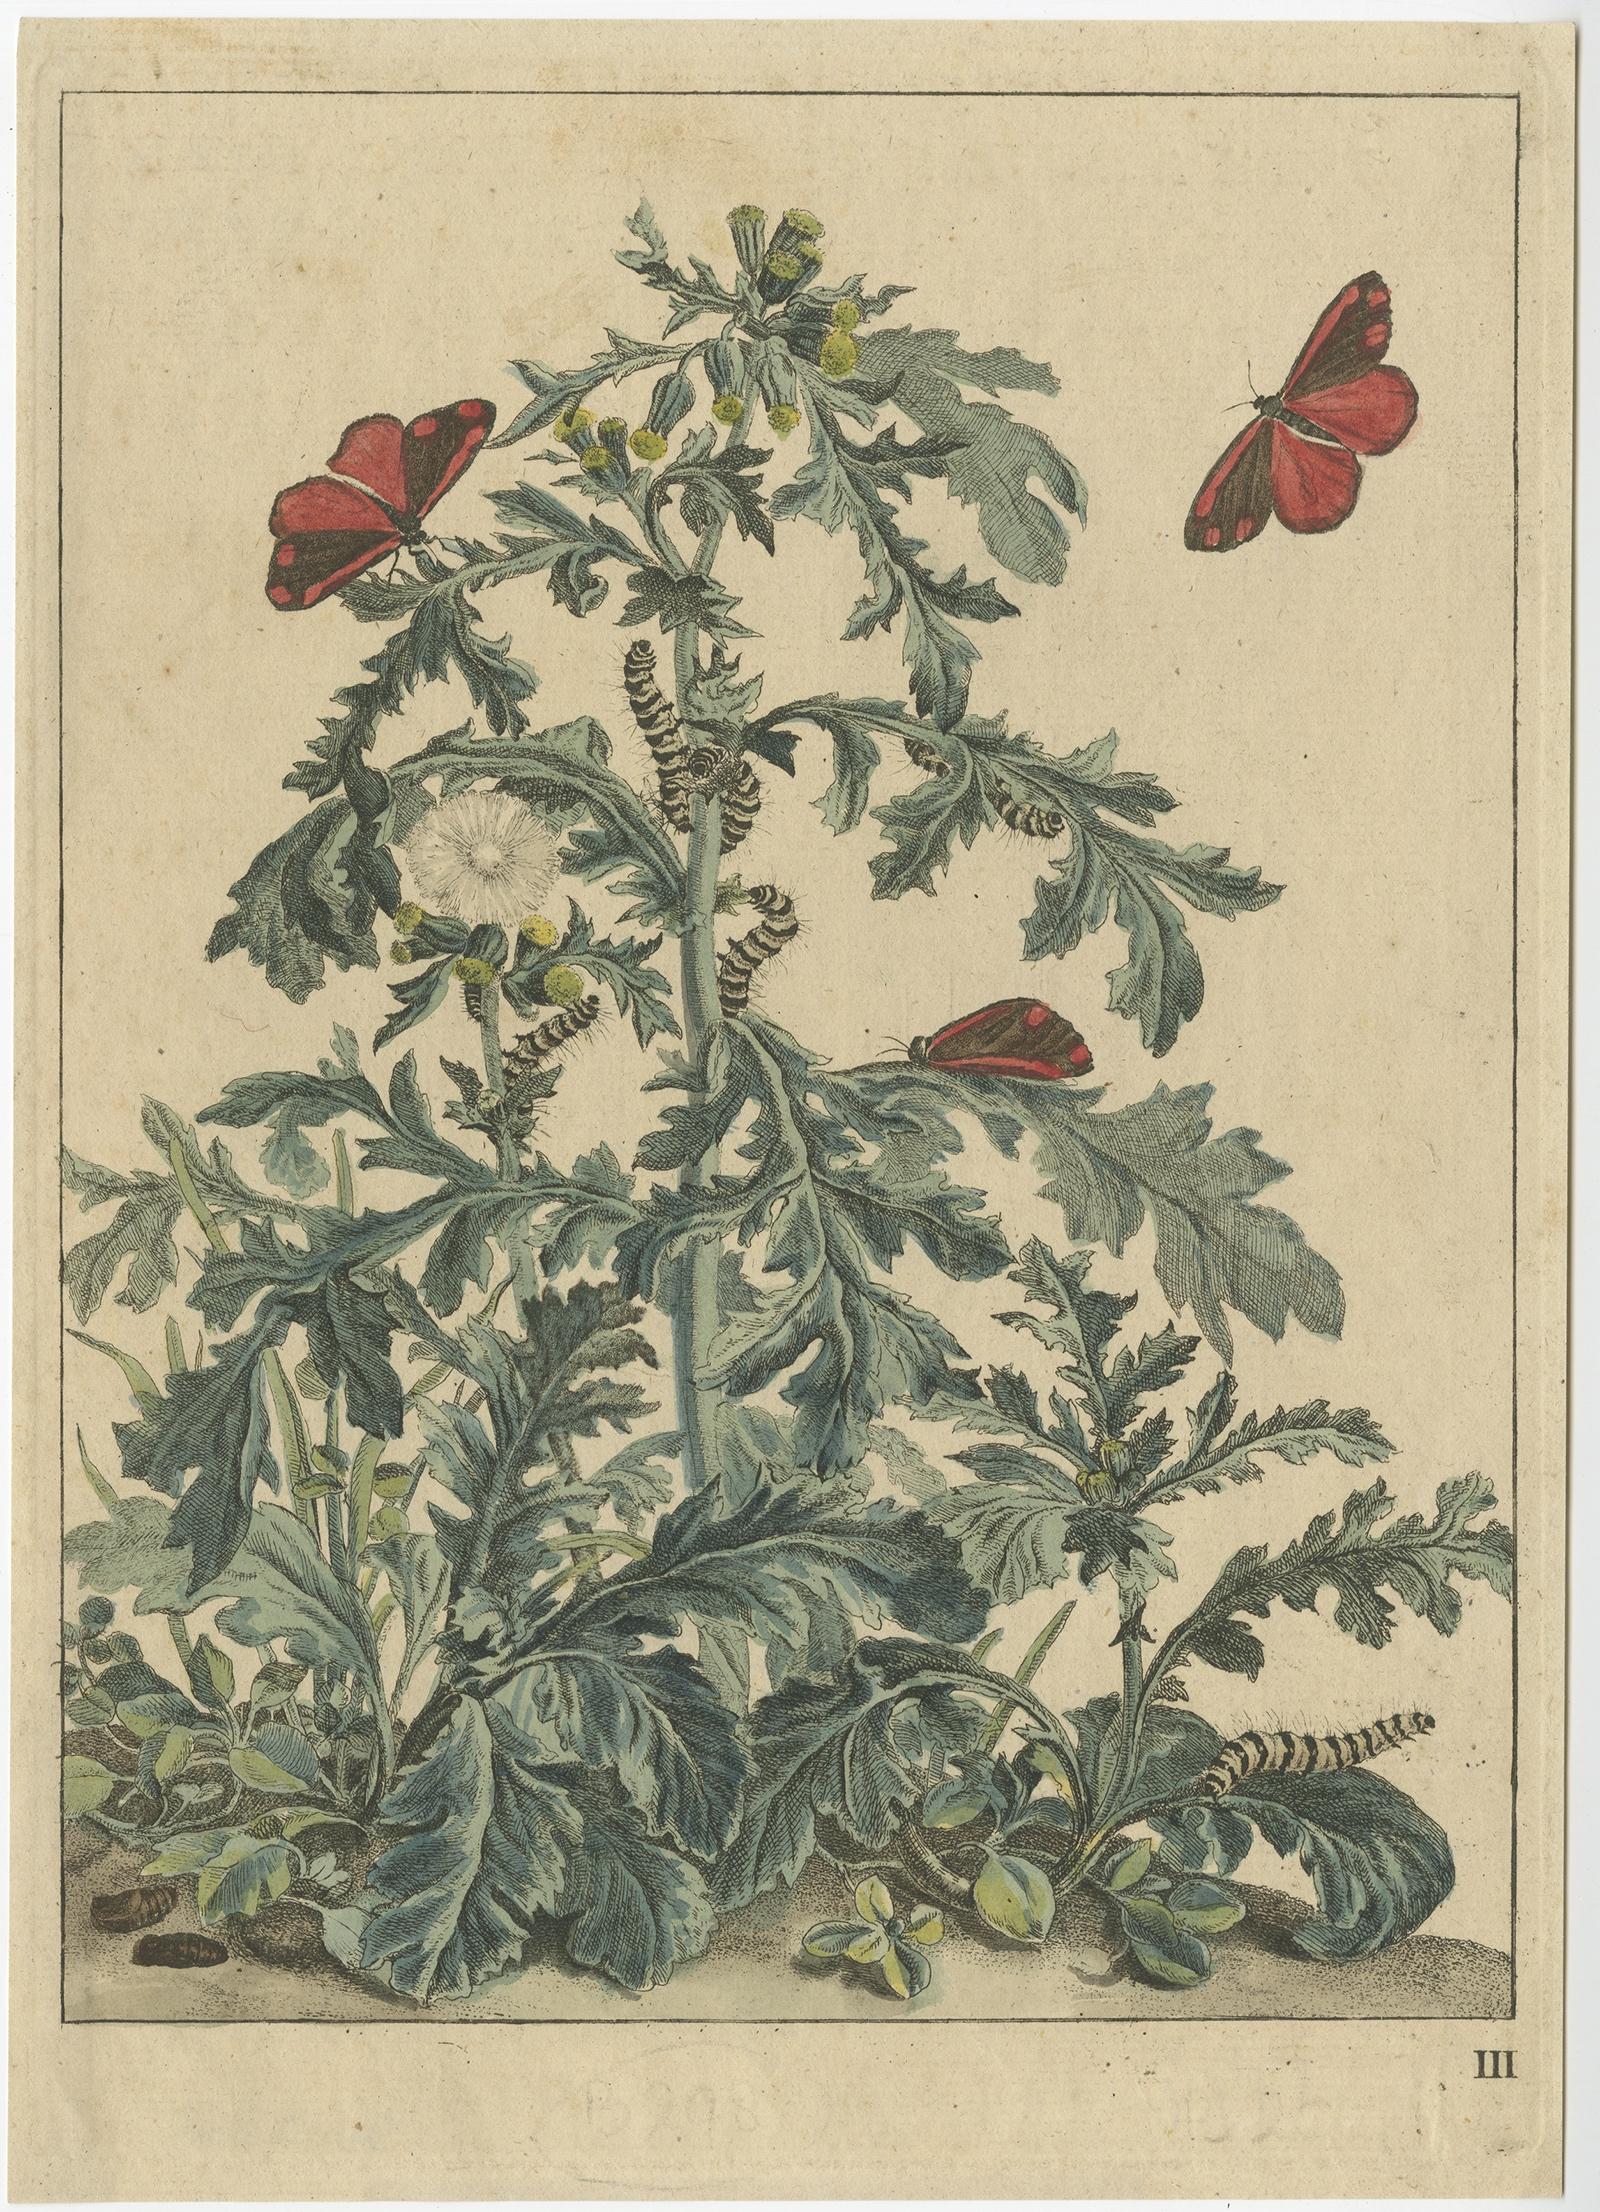 Rare and beautiful butterfly print by Jacob l'Admiral. Starting in 1740 he published only 33 copper etchings. After L'Admiral's death the plates came into the possession of Dr.M. Houttuyn who edited the text and published the plates in 1774 at J.